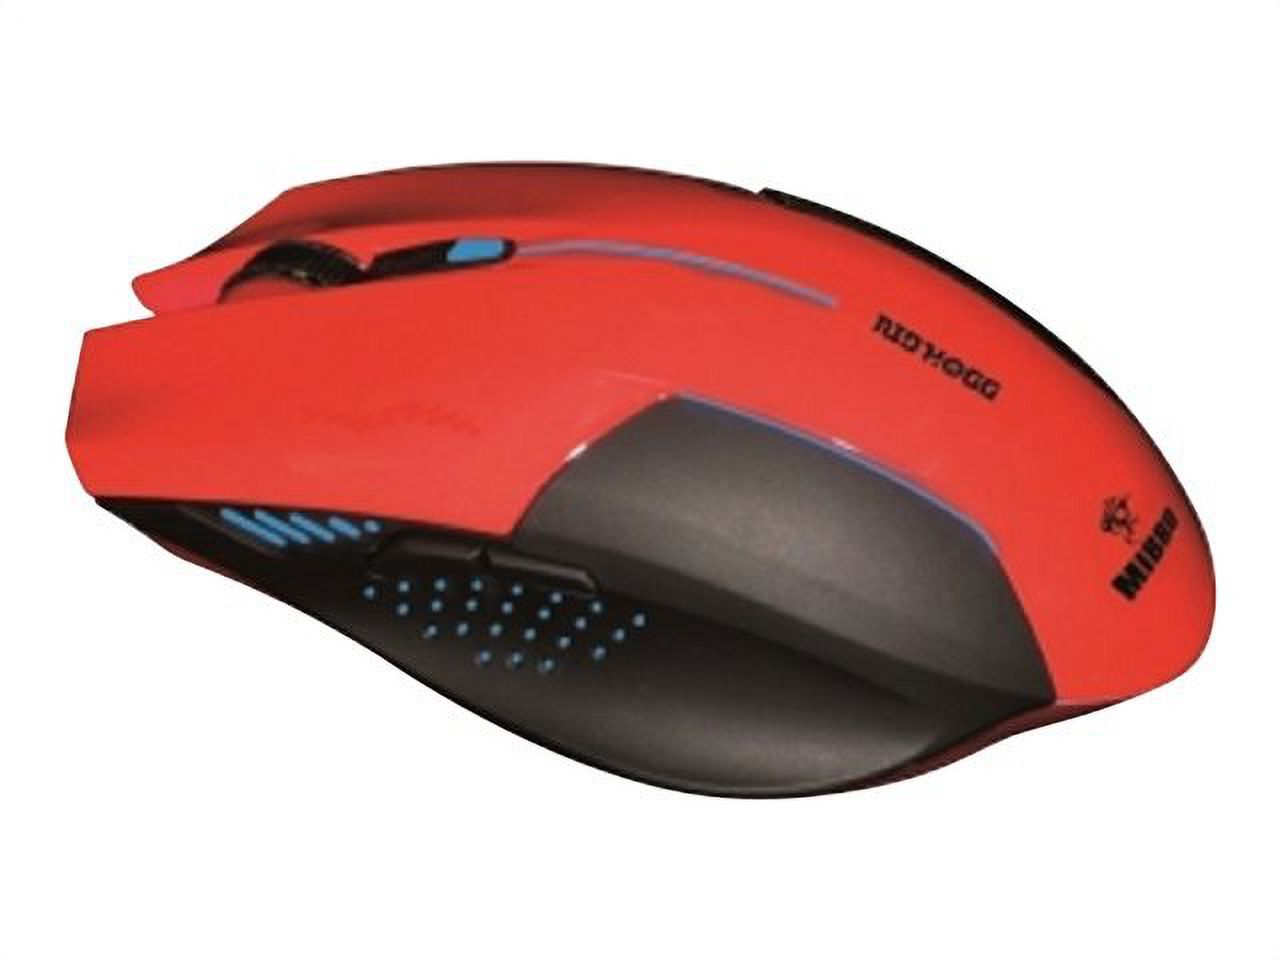 Mibru Nidhogg Ergonomic Gaming Mouse - Mouse - right-handed - optical - 5 buttons - wired - USB - red - image 2 of 6